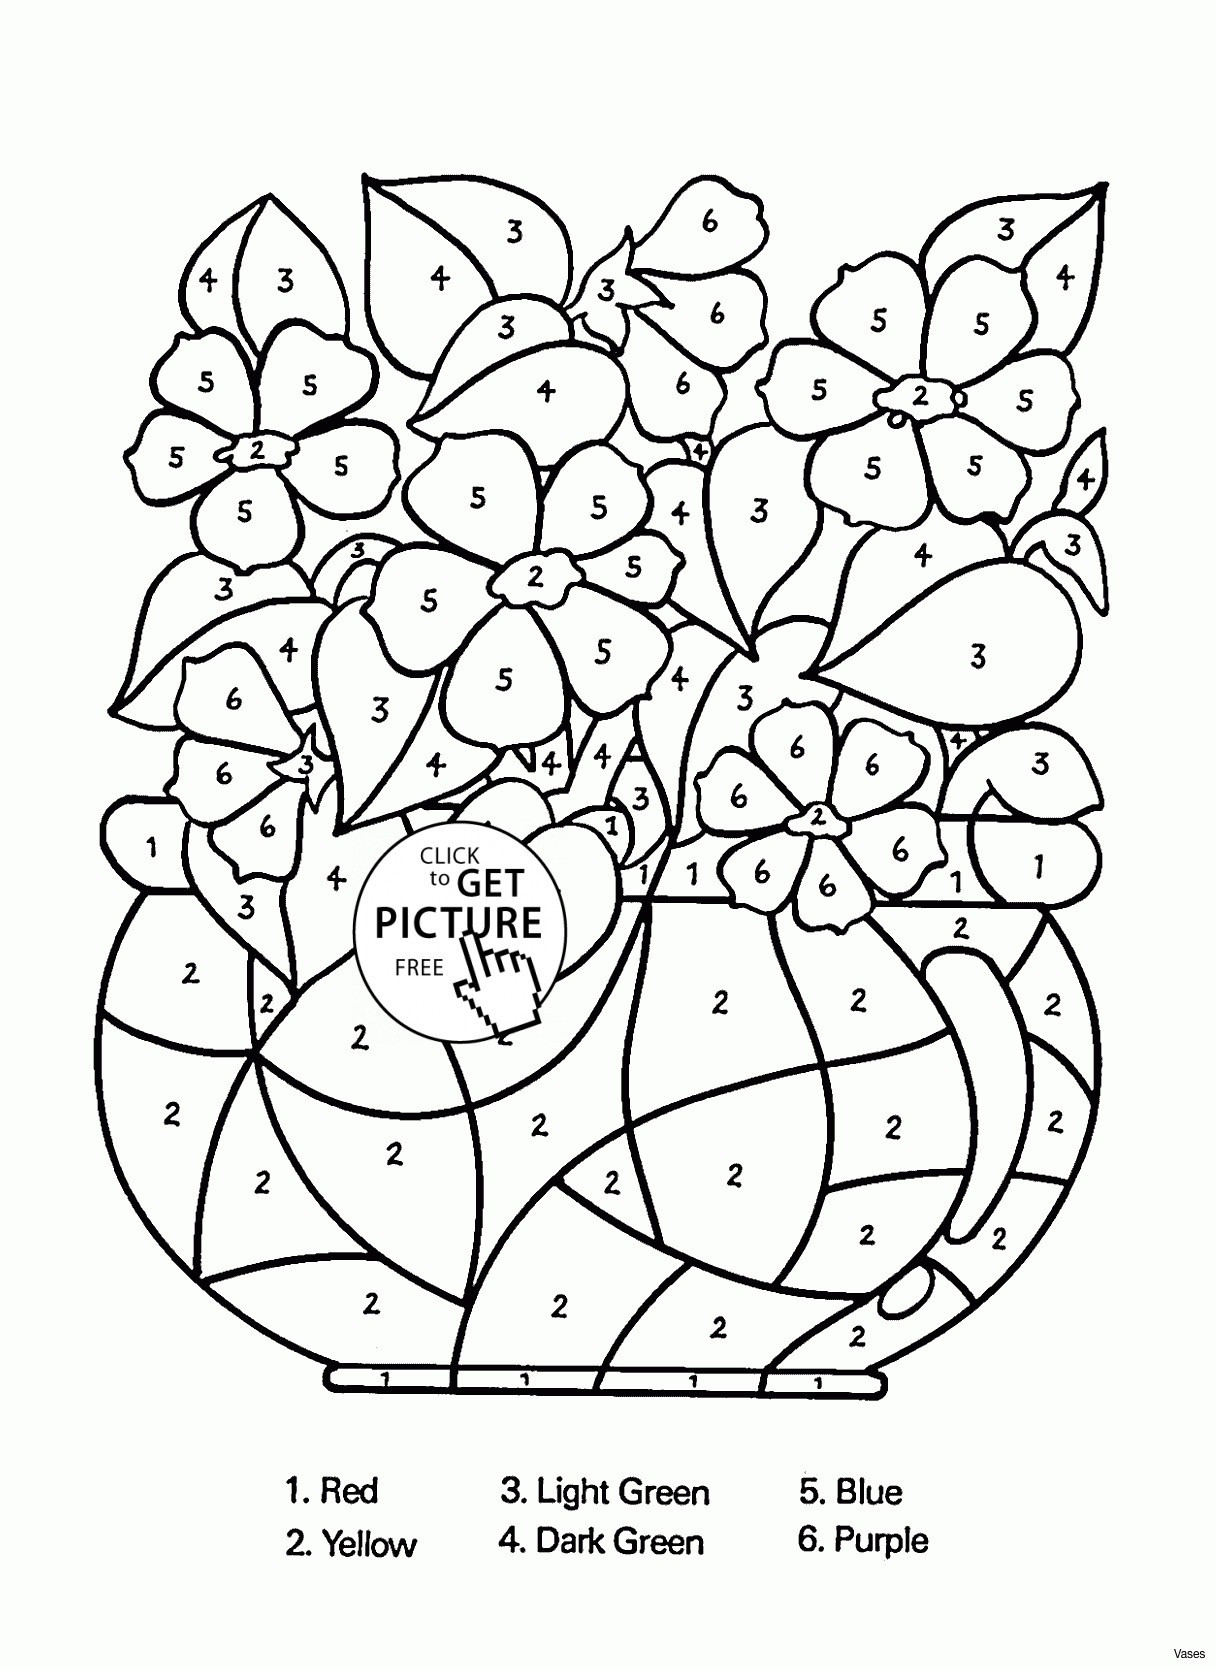 Customized Coloring Pages Coloring Pages Customized Coloring Pages With Names On It Download